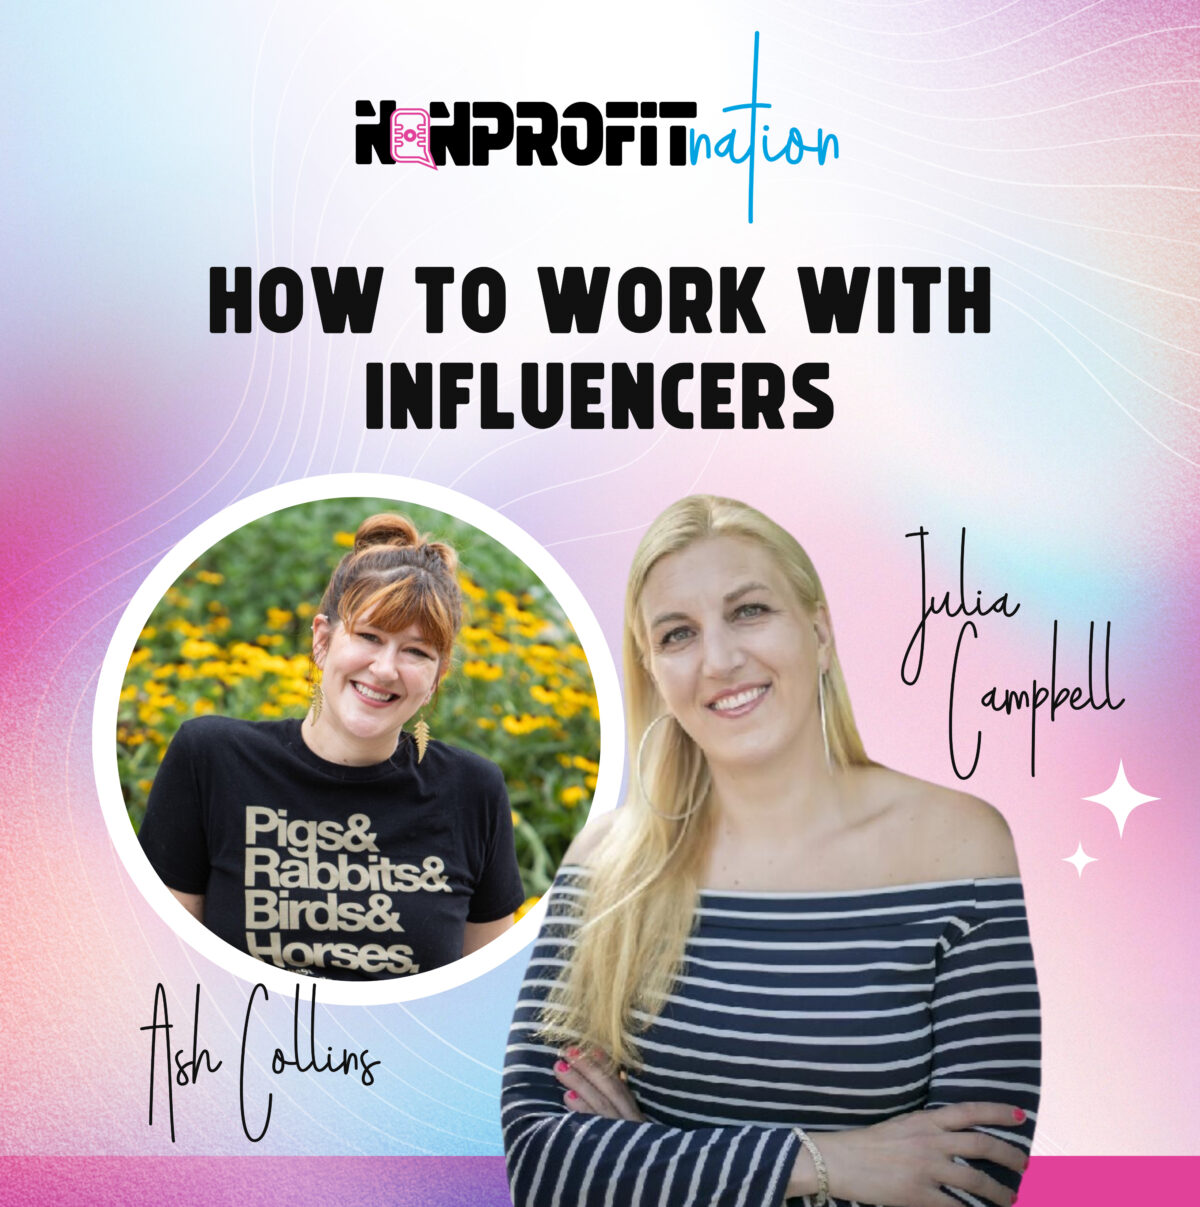 How to Work with Influencers with Ash Collins of Best Friends Animal Society